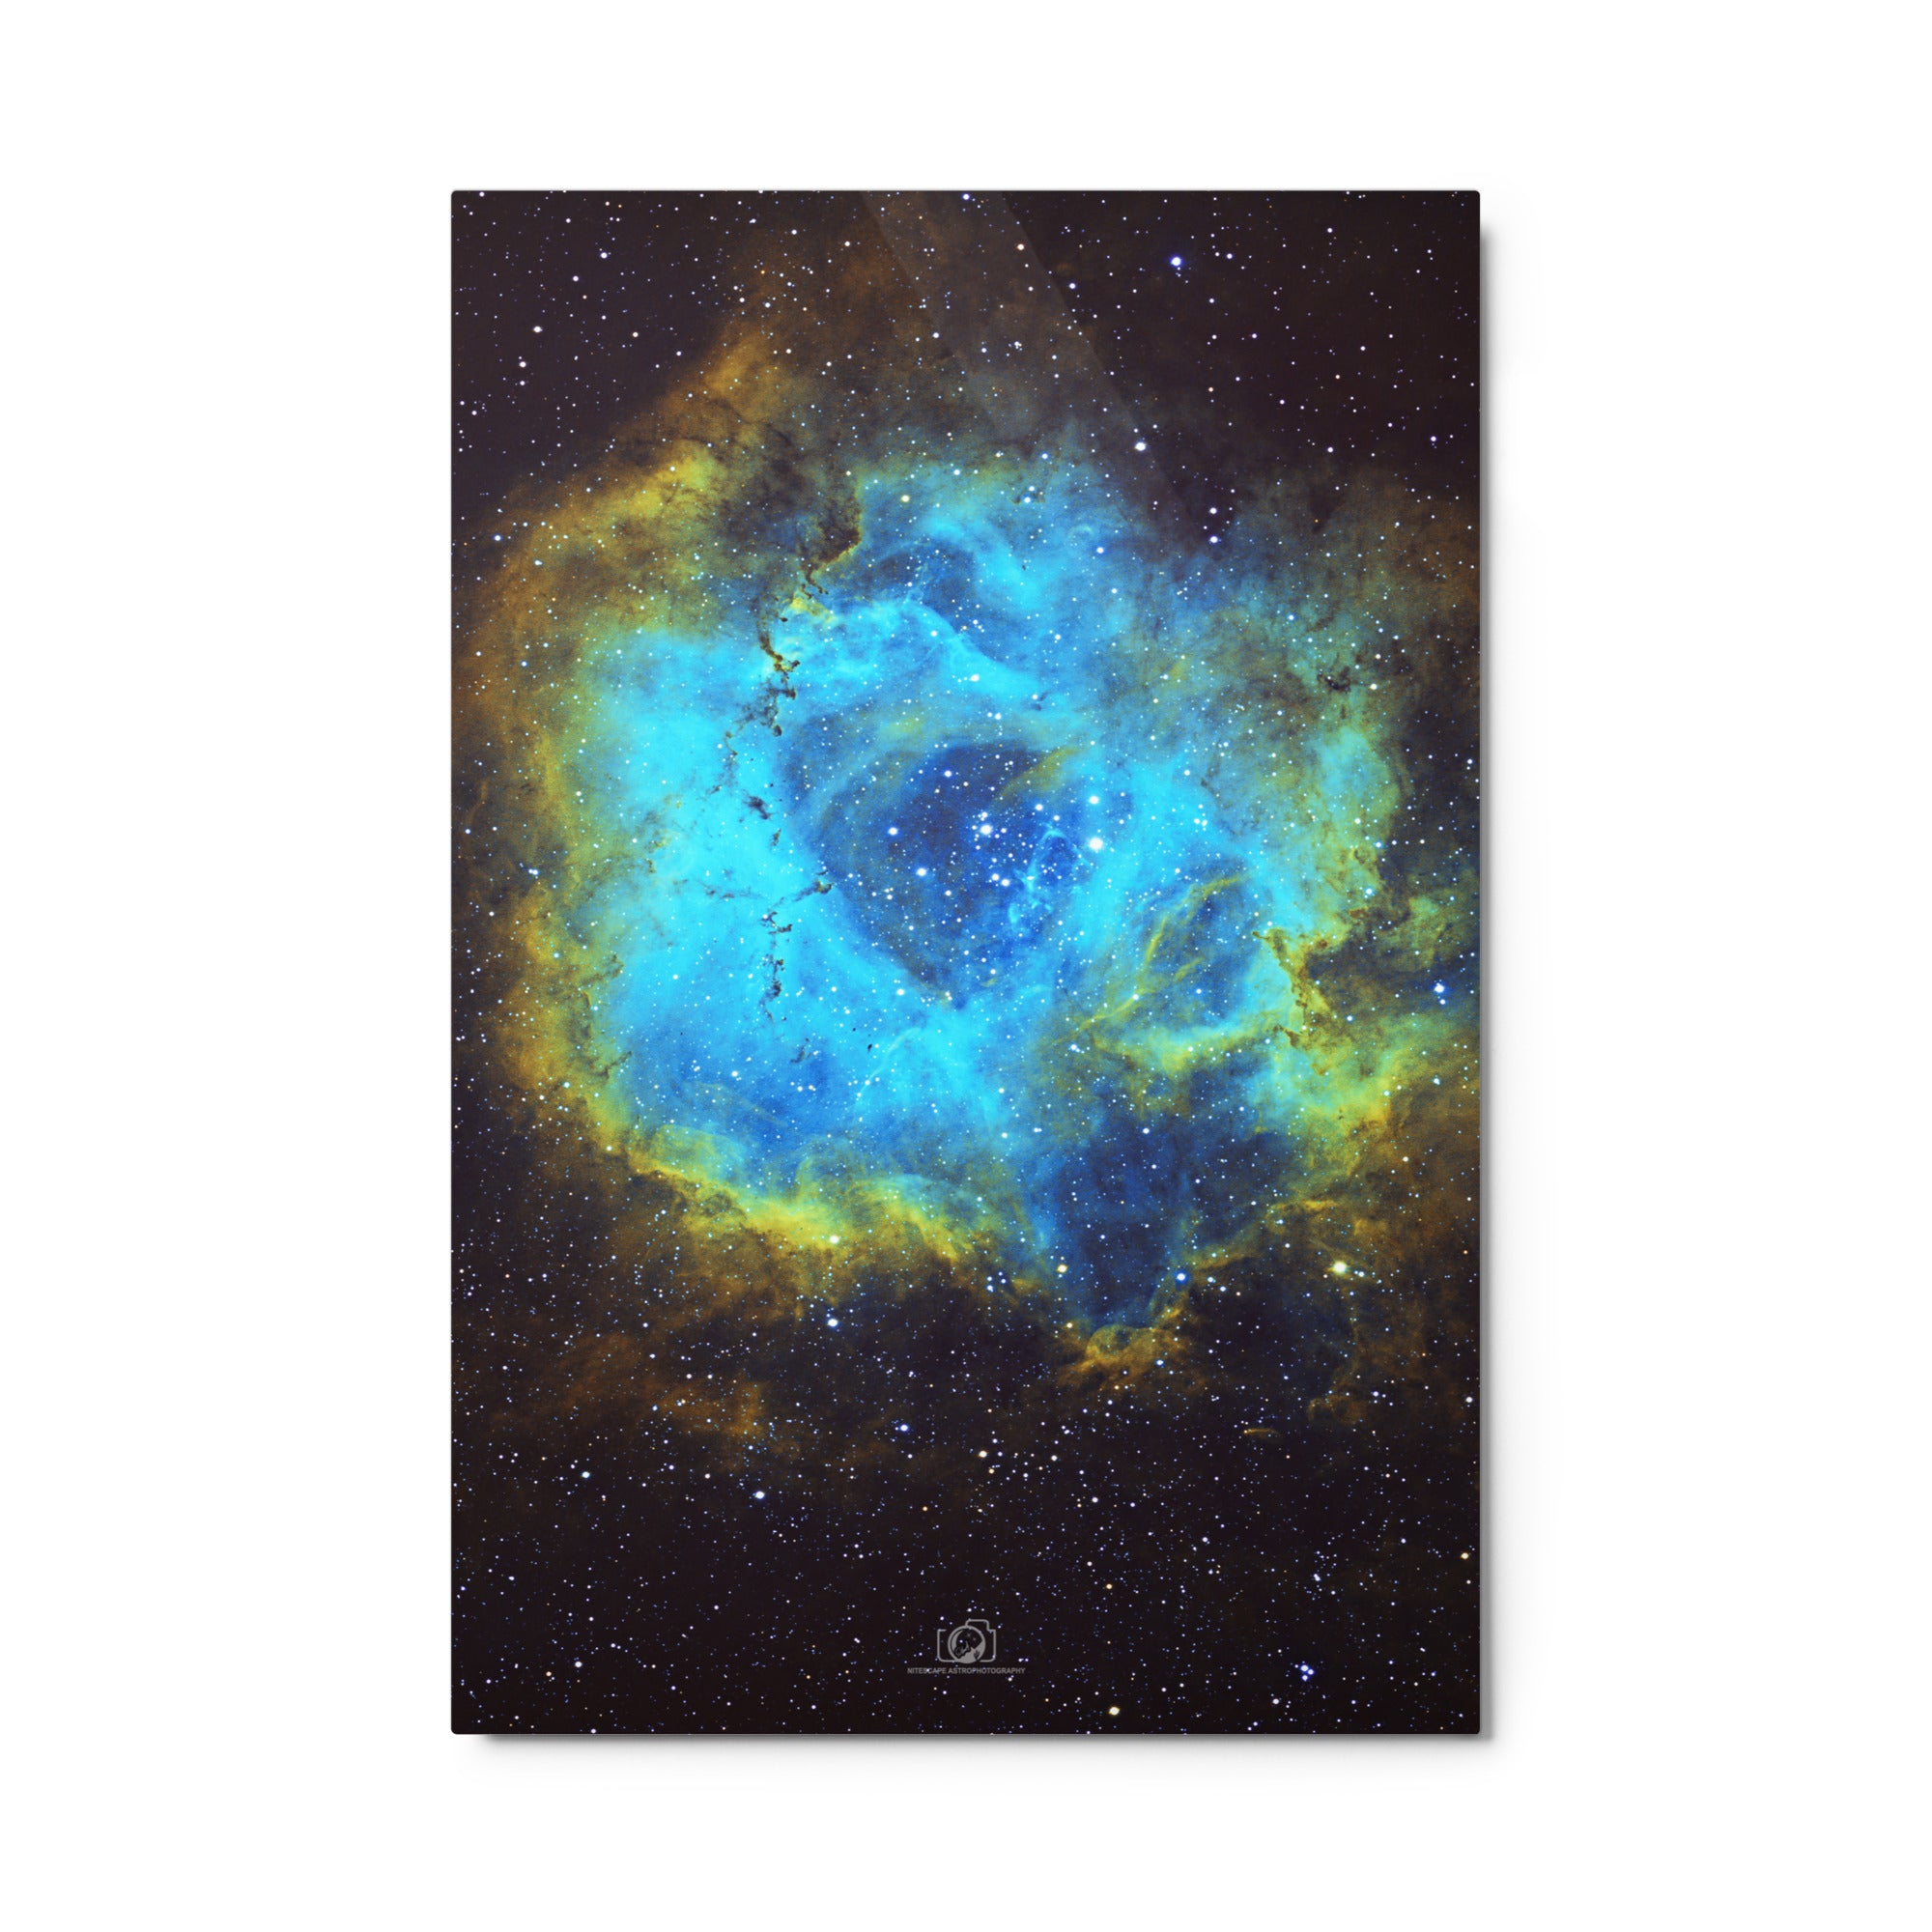 A breathtaking astrophotography metal print showcasing the majestic beauty of the universe.